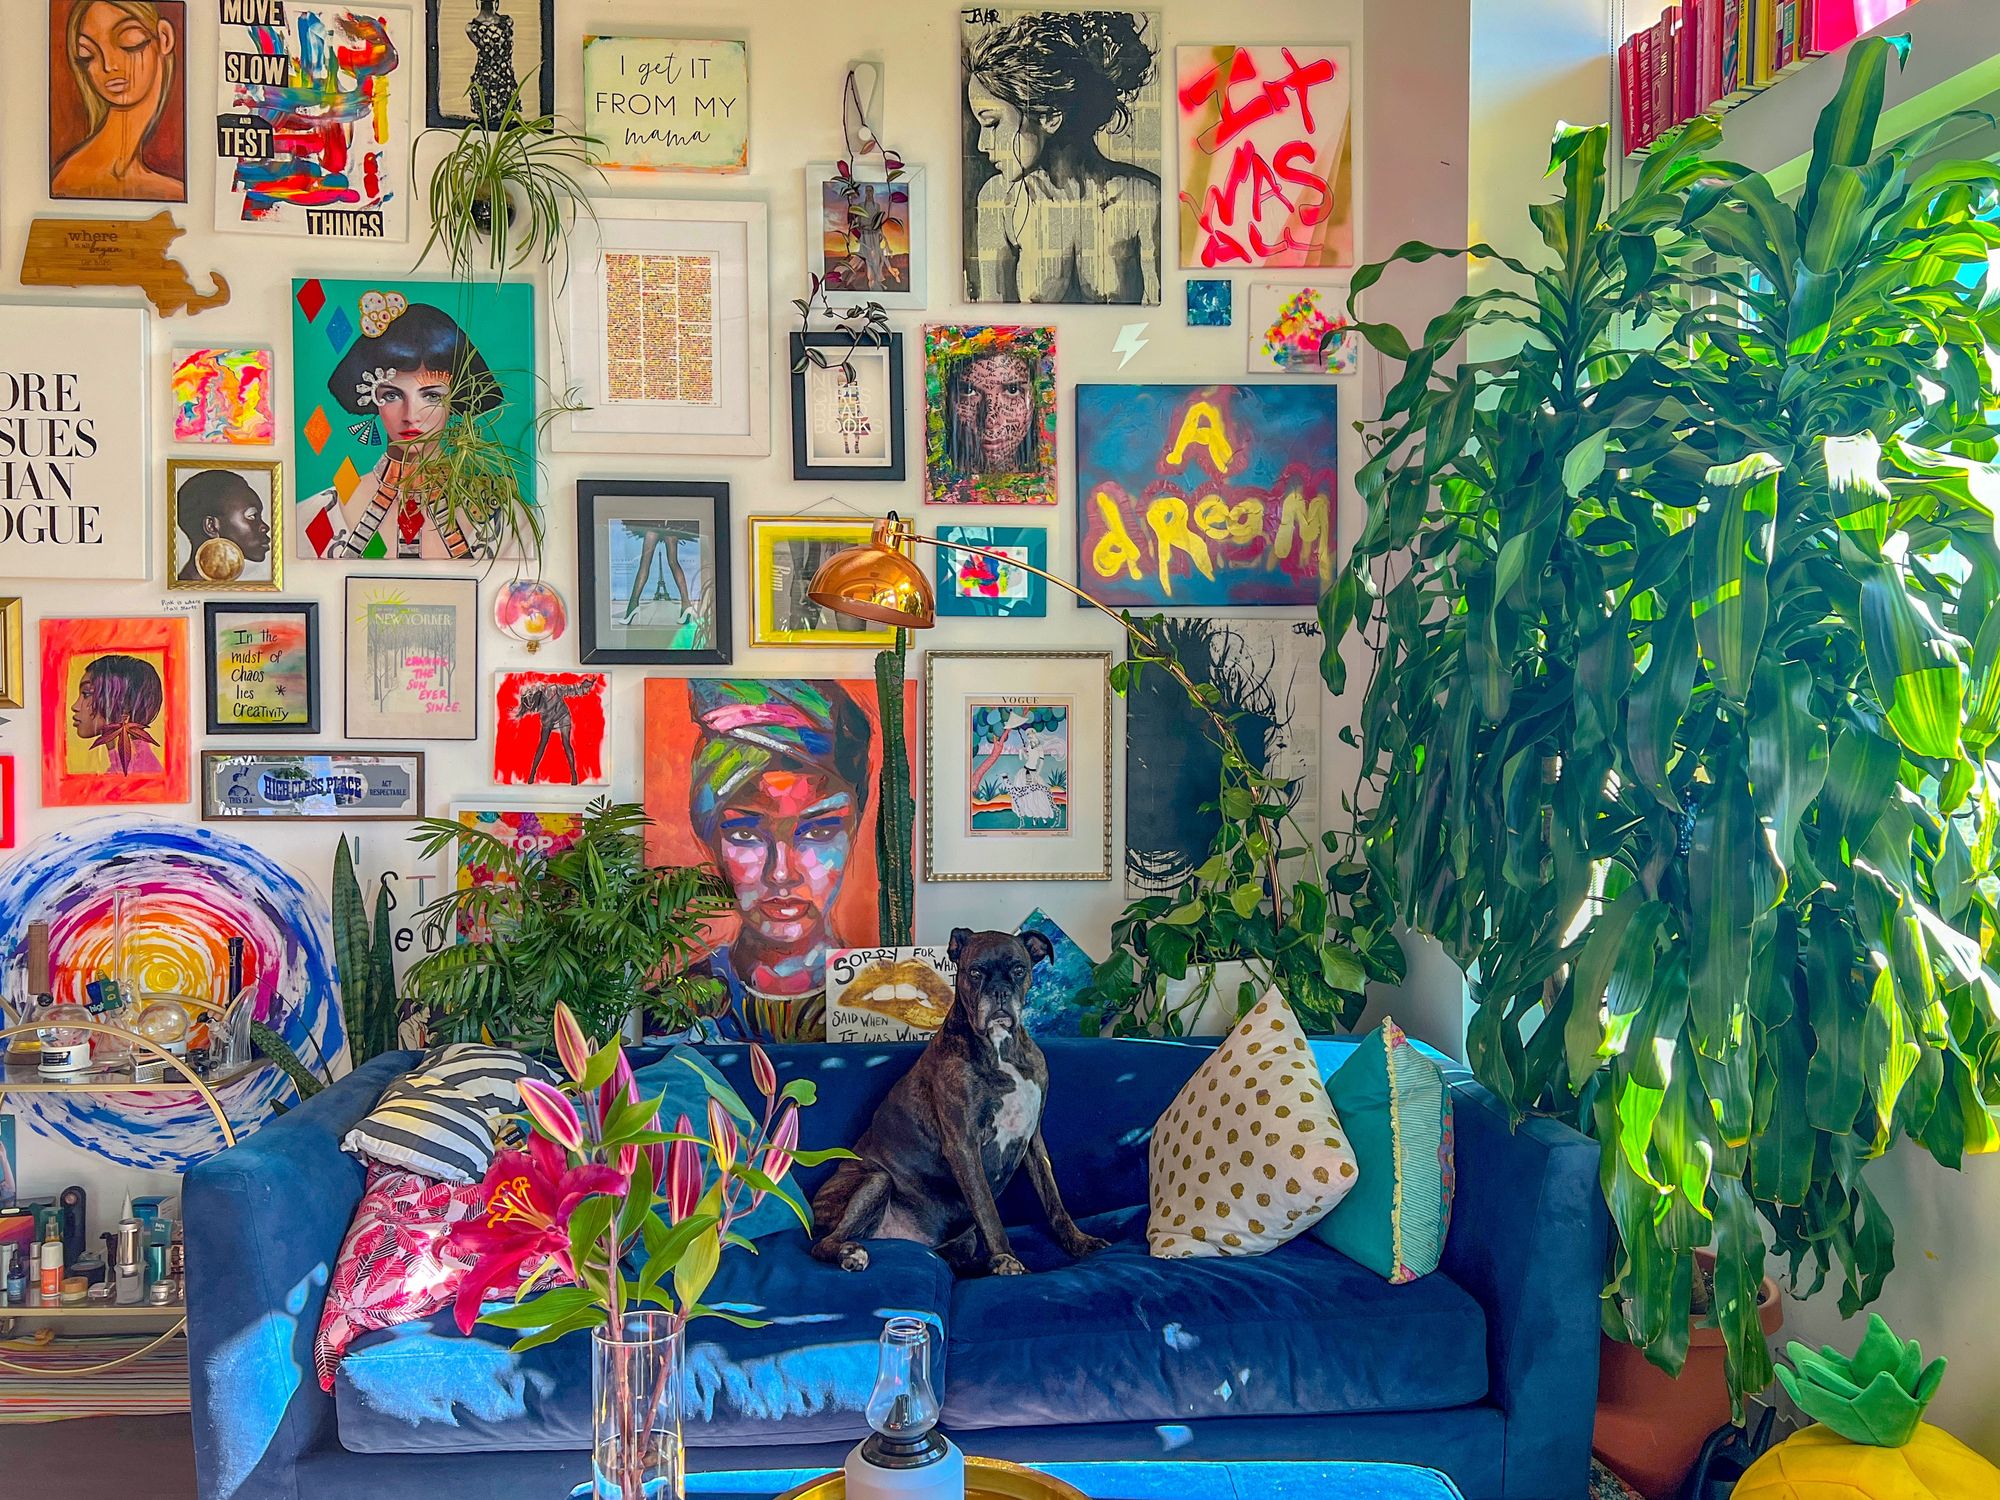 Maximalist living room filled with vibrant colors, bold patterns, and eclectic décor.